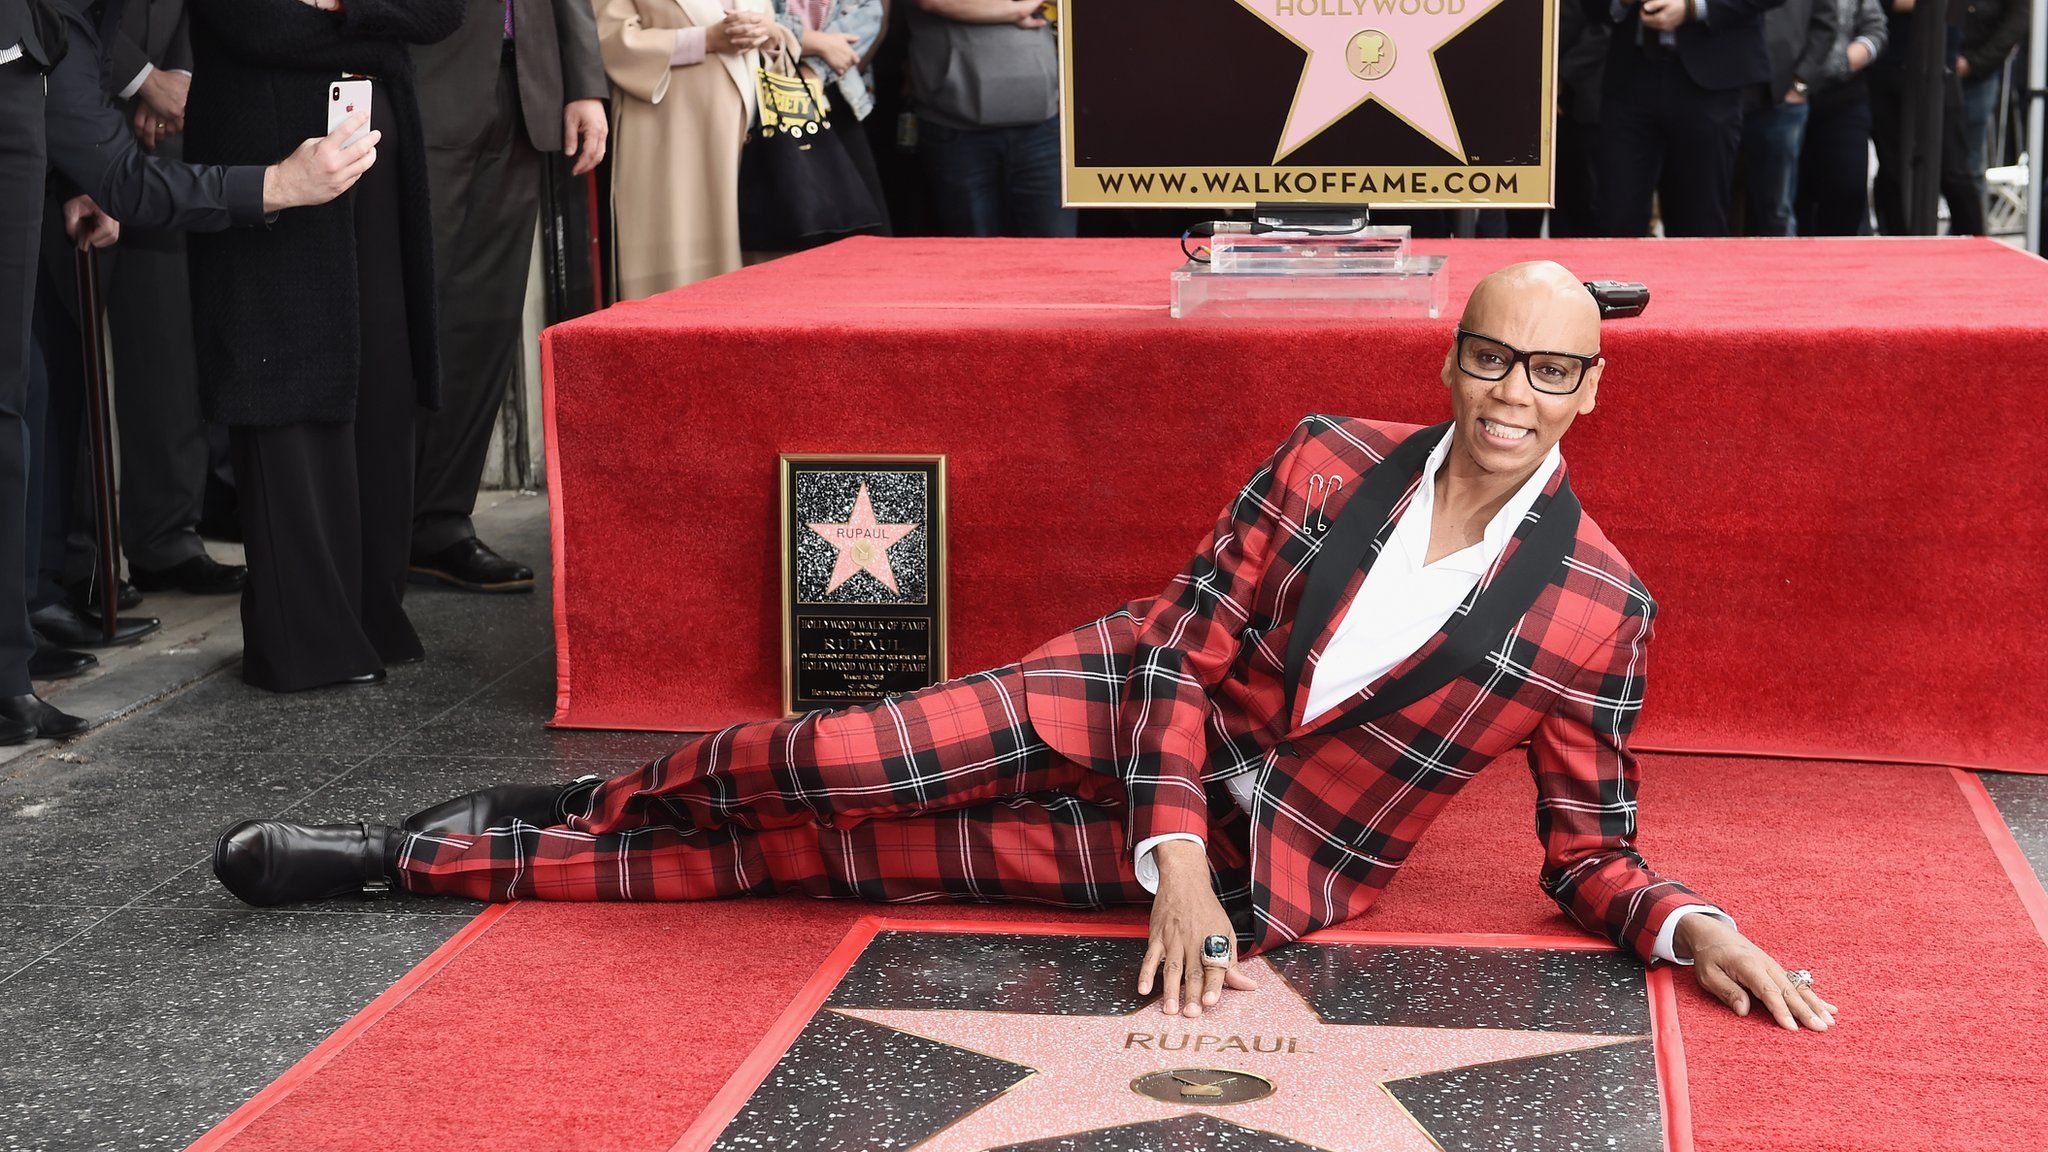 RuPaul poses with his star